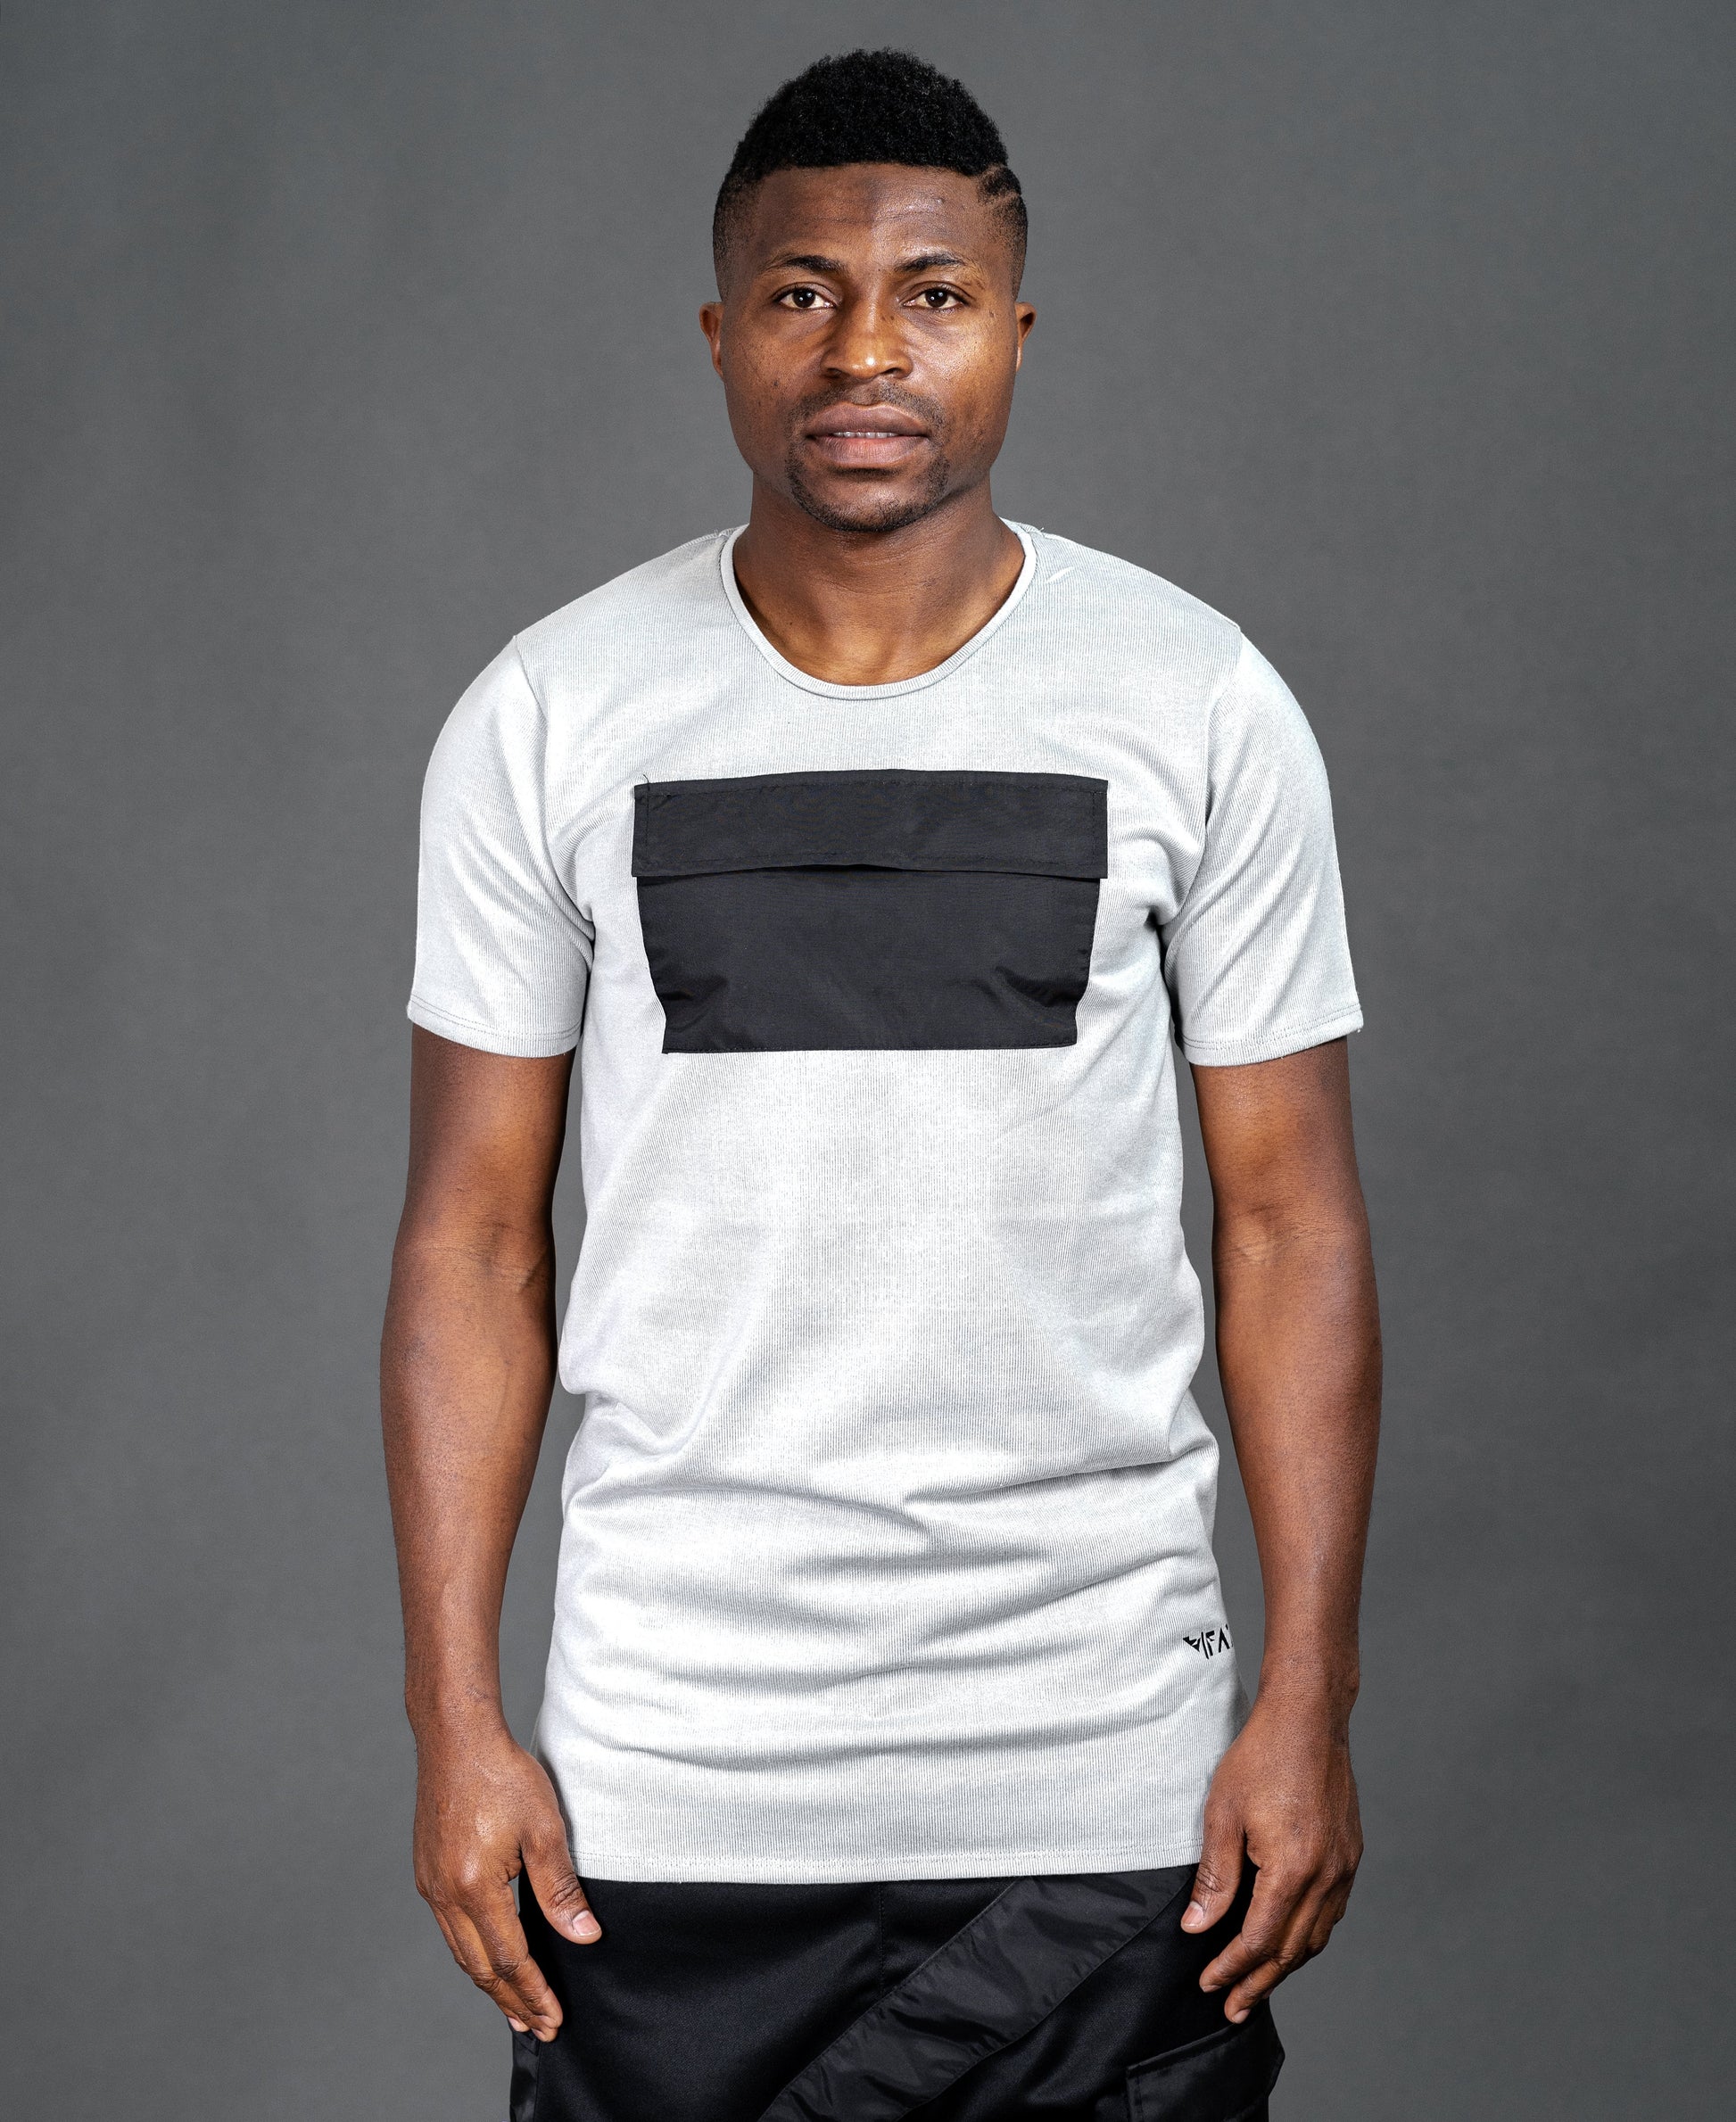 Grey t-shirt with black pocket - Fatai Style